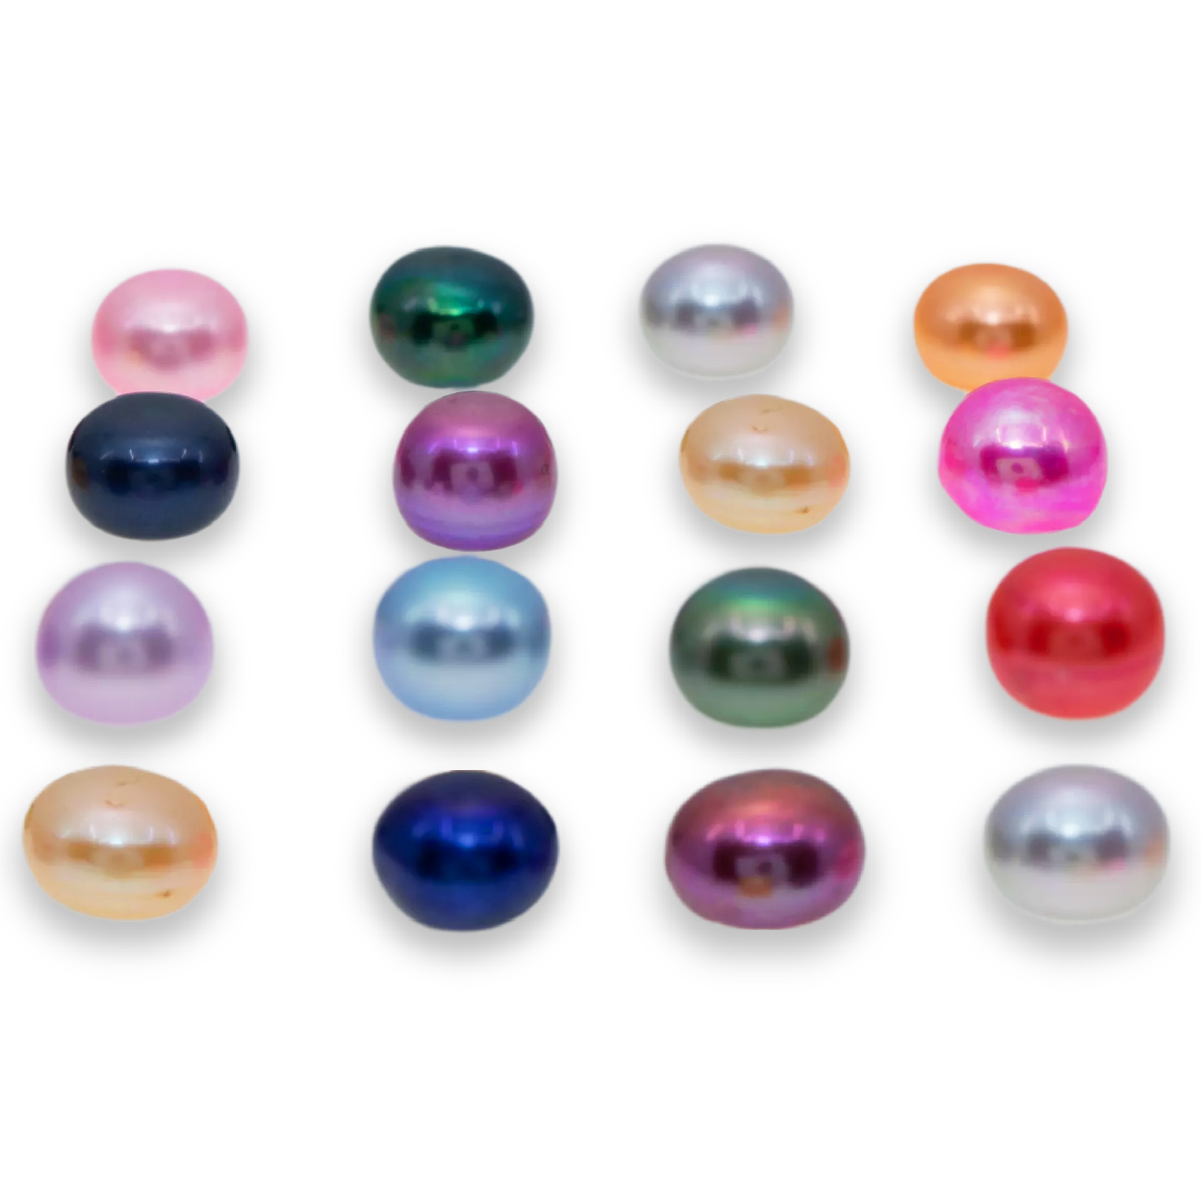 LOOSE PEARL - Pre Drilled Button Shaped Flat Bottom Pearls 6-10mm